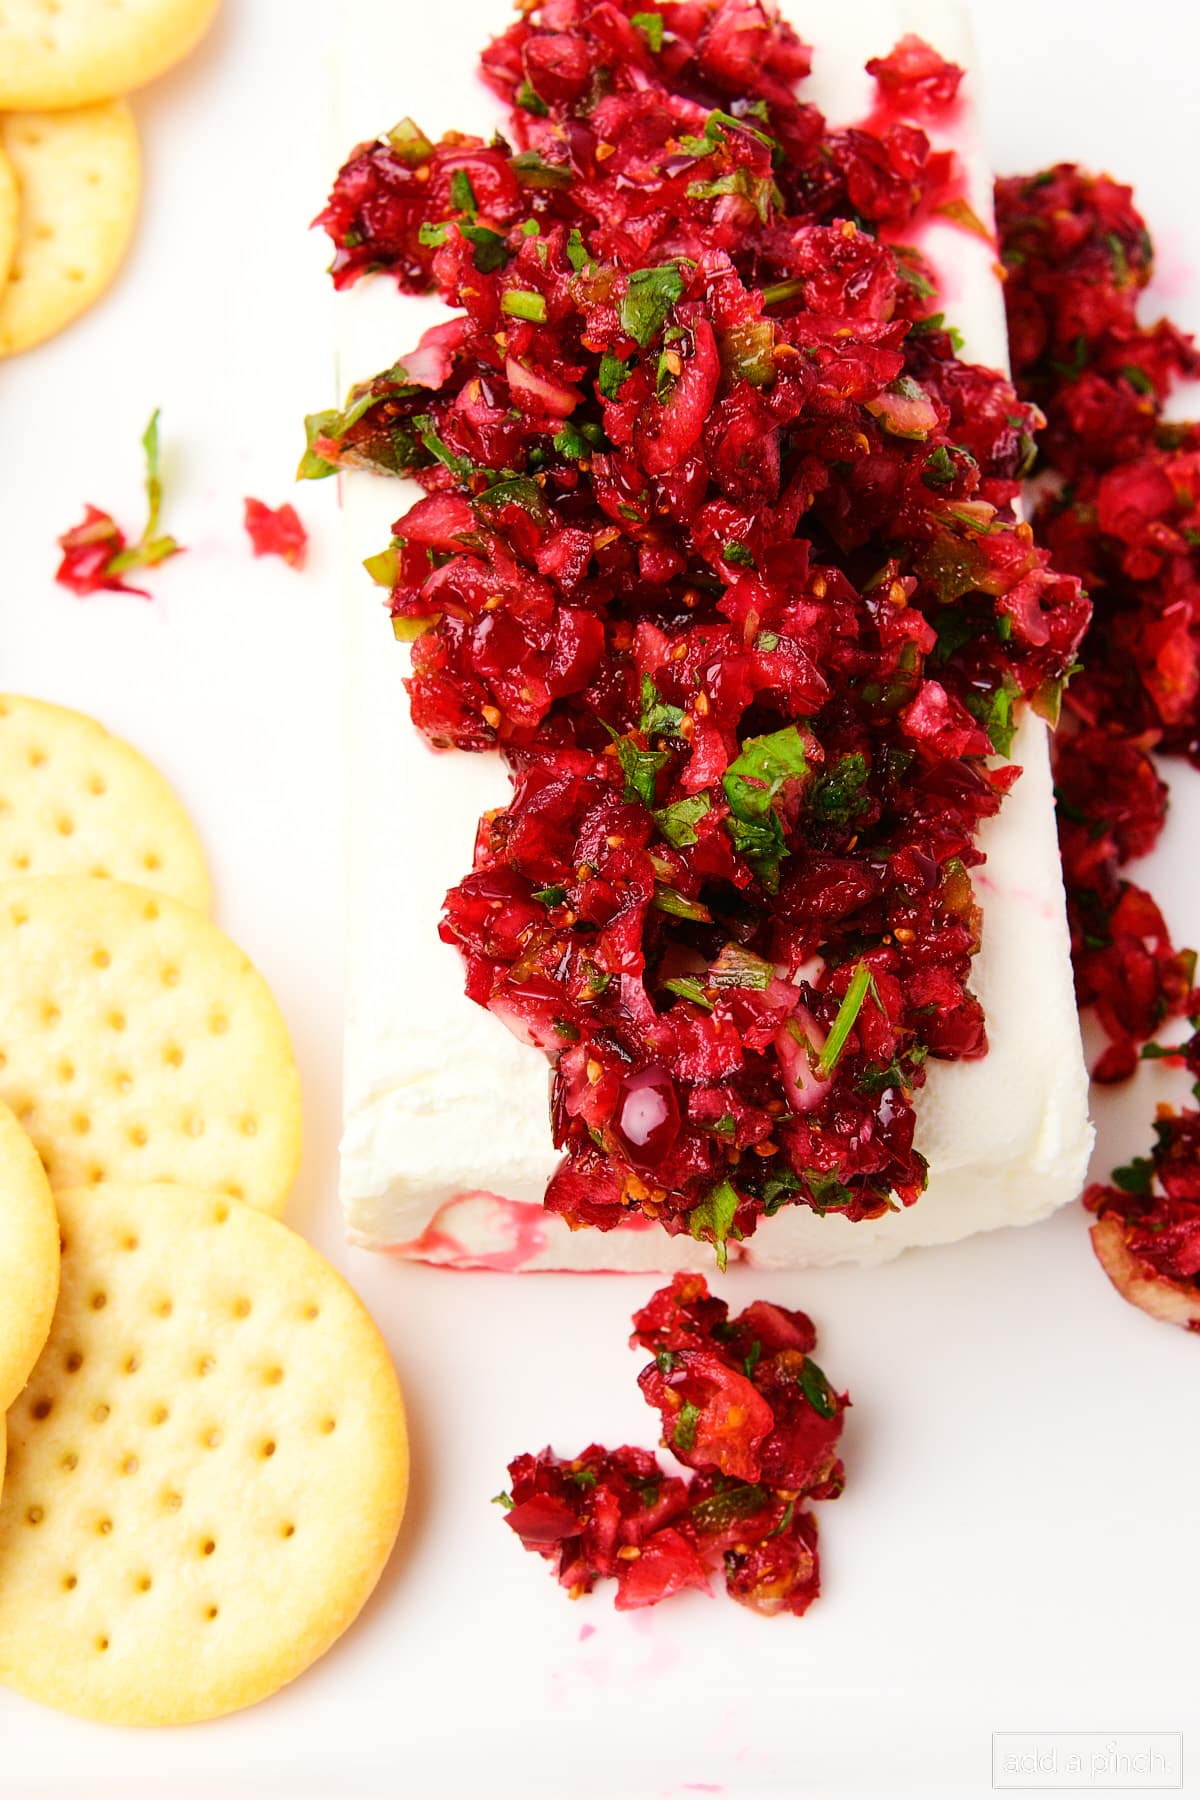 Serving platter holds round butter crackers, as well as cranberry salsa over cream cheese block.  